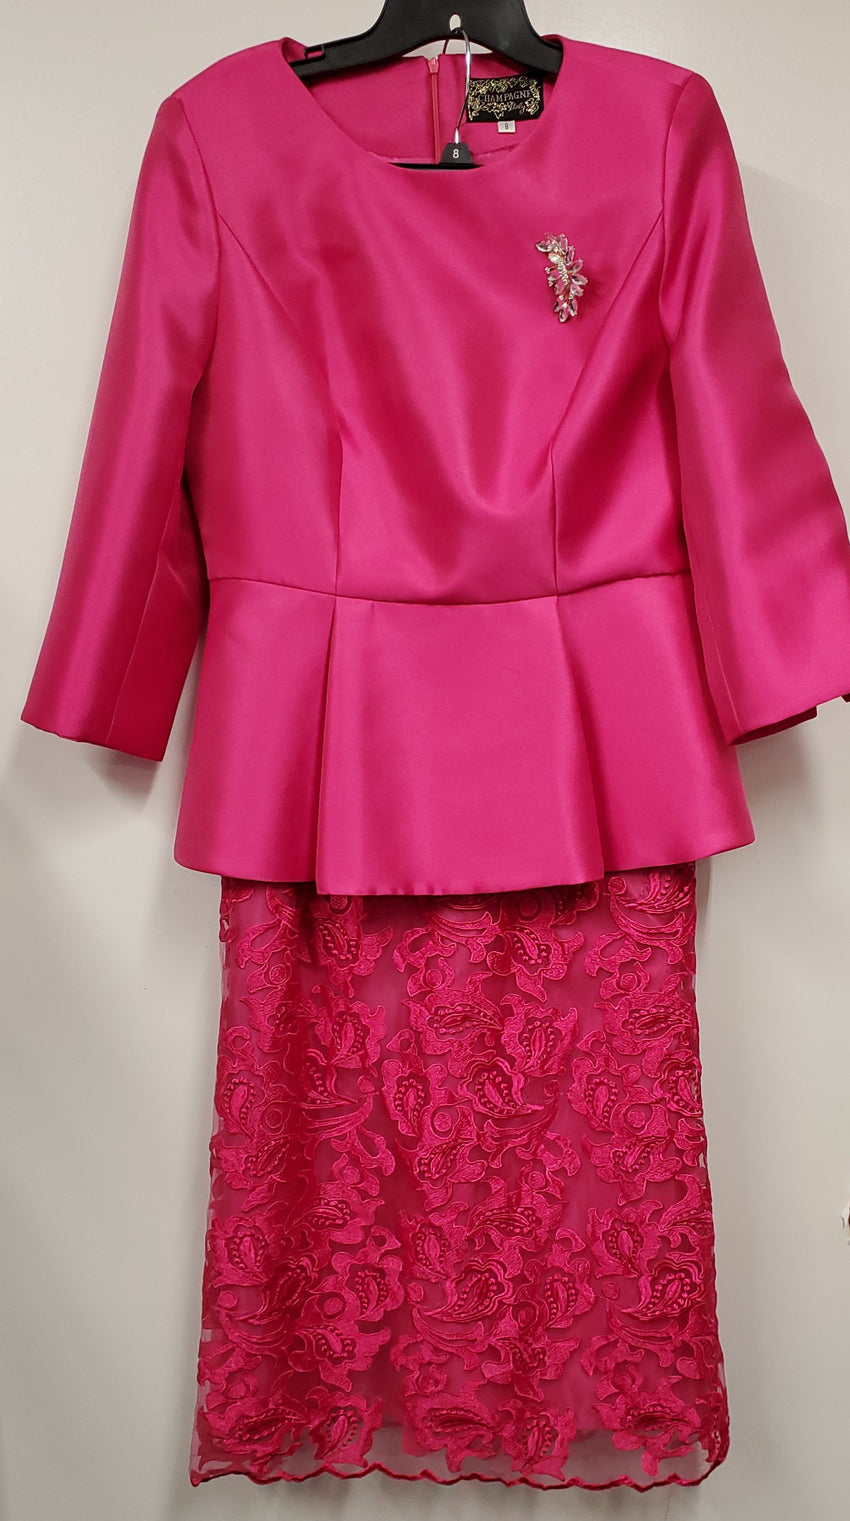 Champagne Ladies High End 2pc Pink Pants Suit with Lace